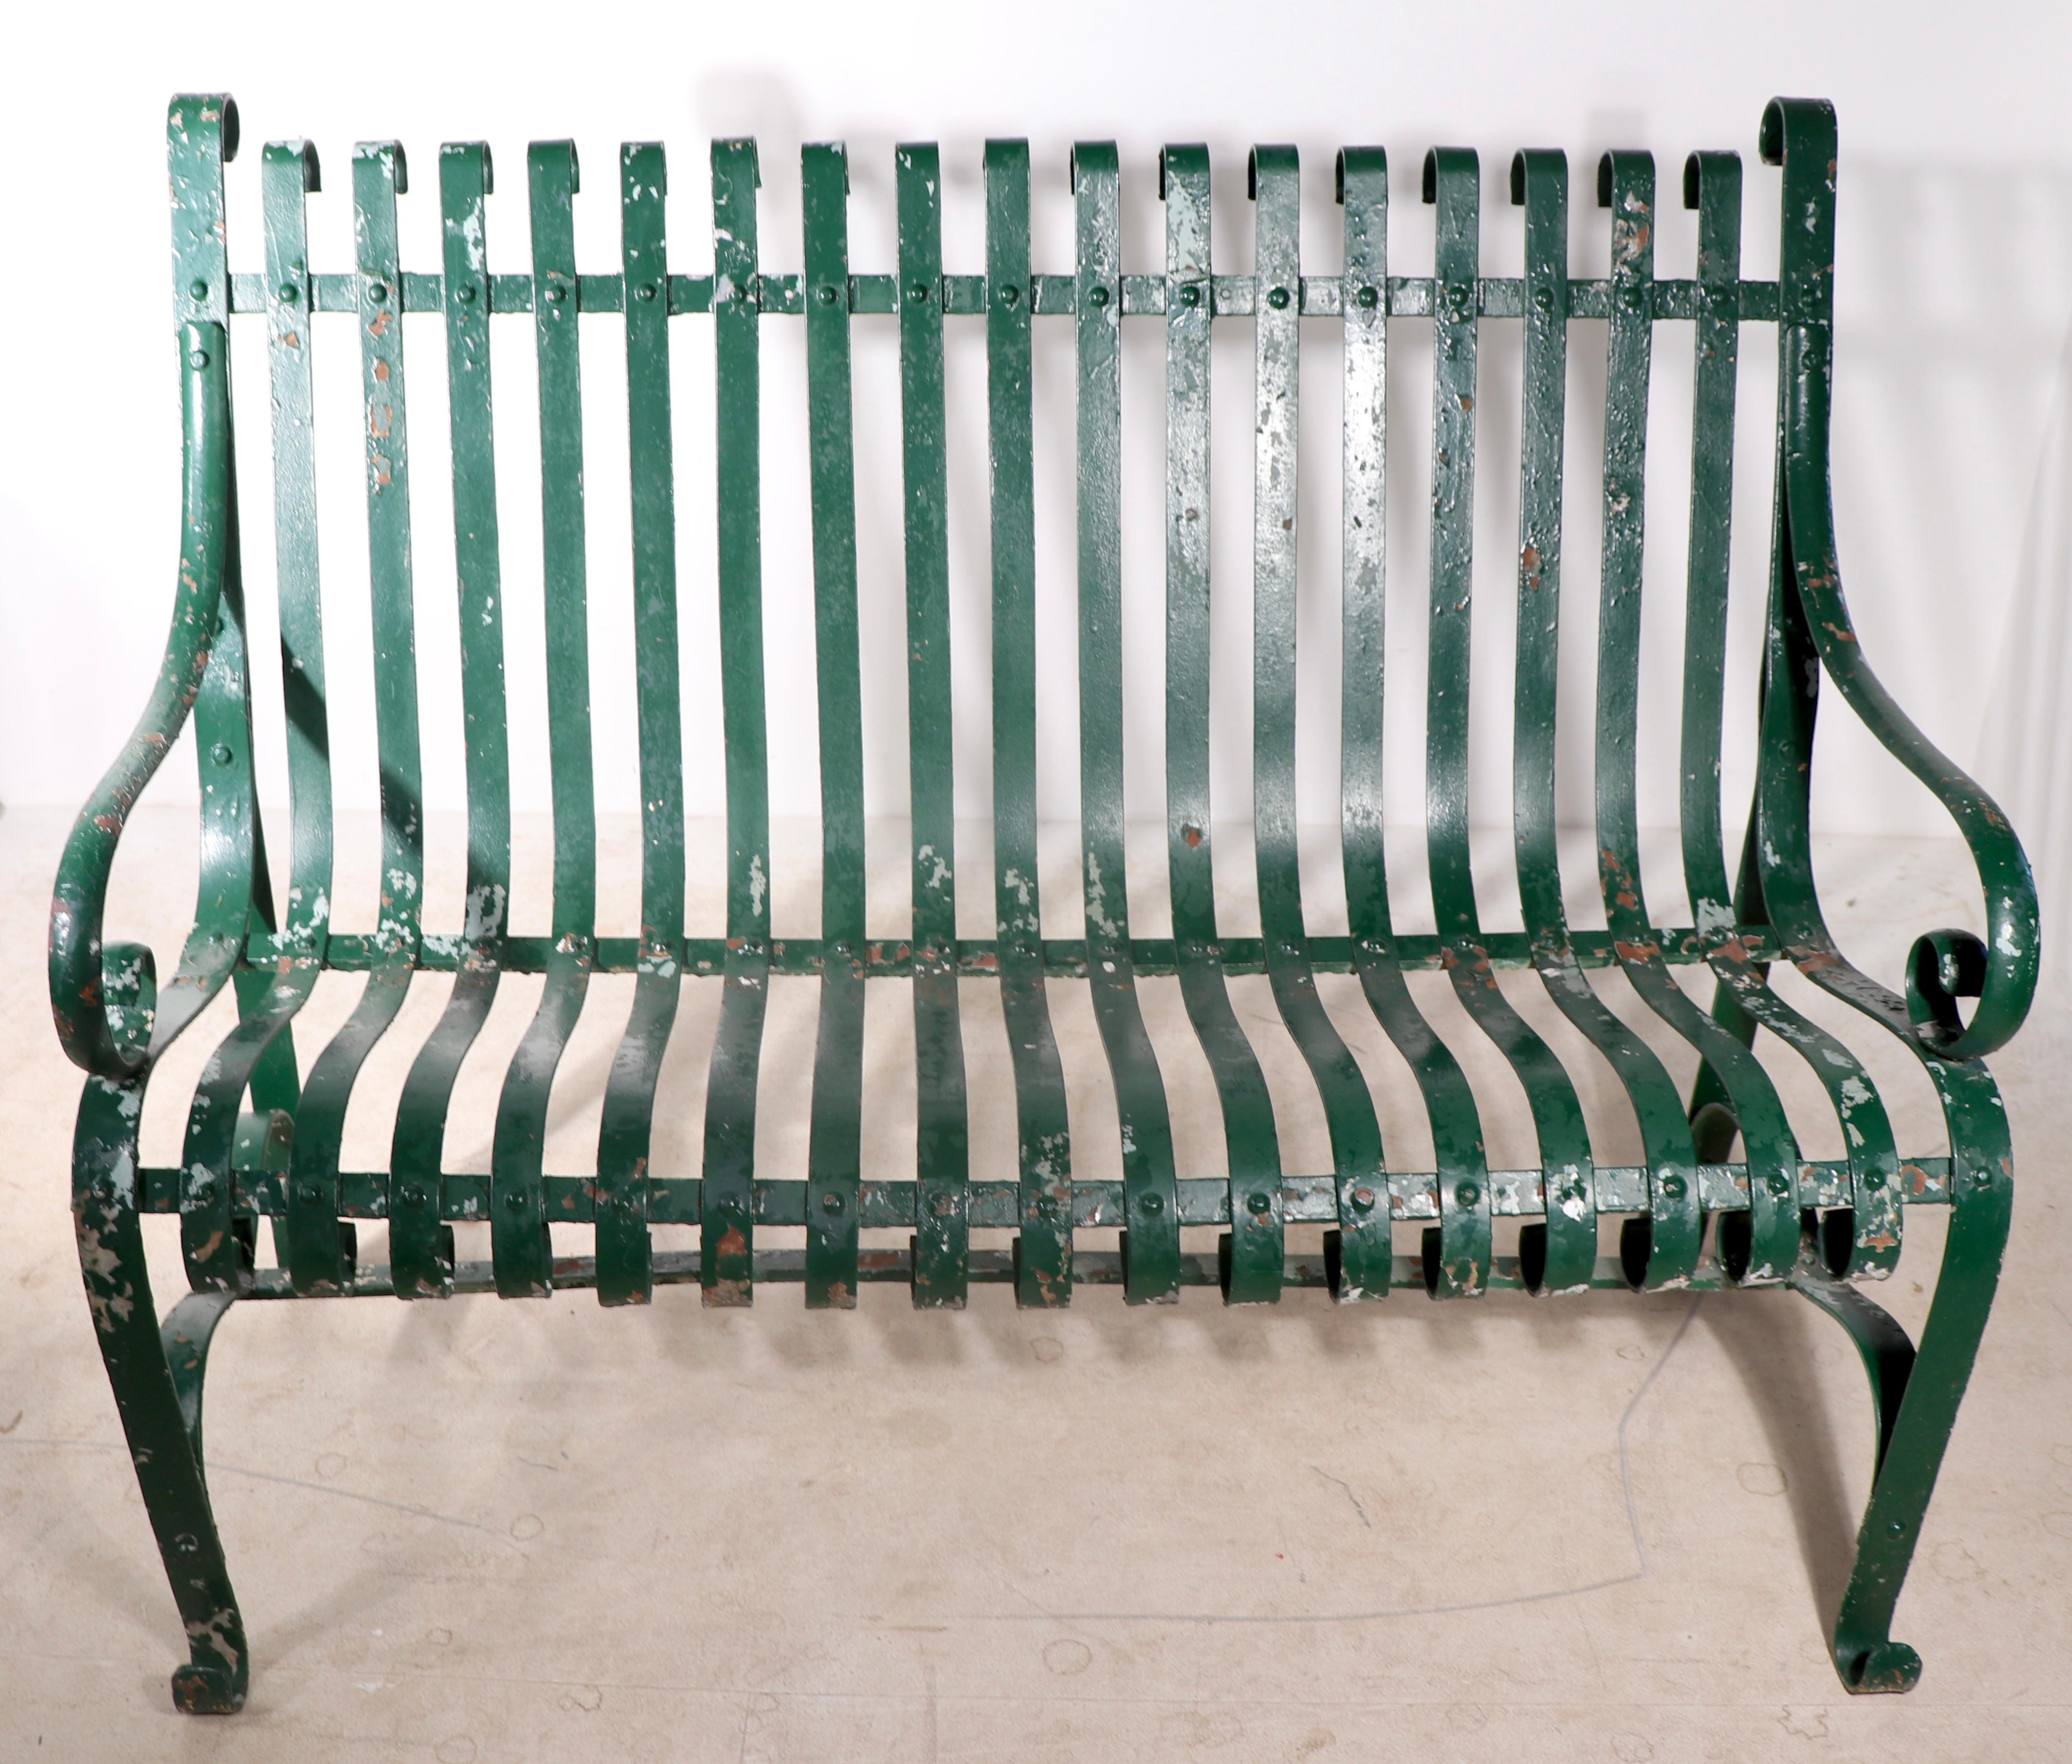 Charming garden, patio, or park loveseat size bench of wrought iron and strap steel. This example is in very good estate condition, sturdy, s and solid,  showing only cosmetic wear to the paint finish, normal and consistent with age and use. 
 Hard